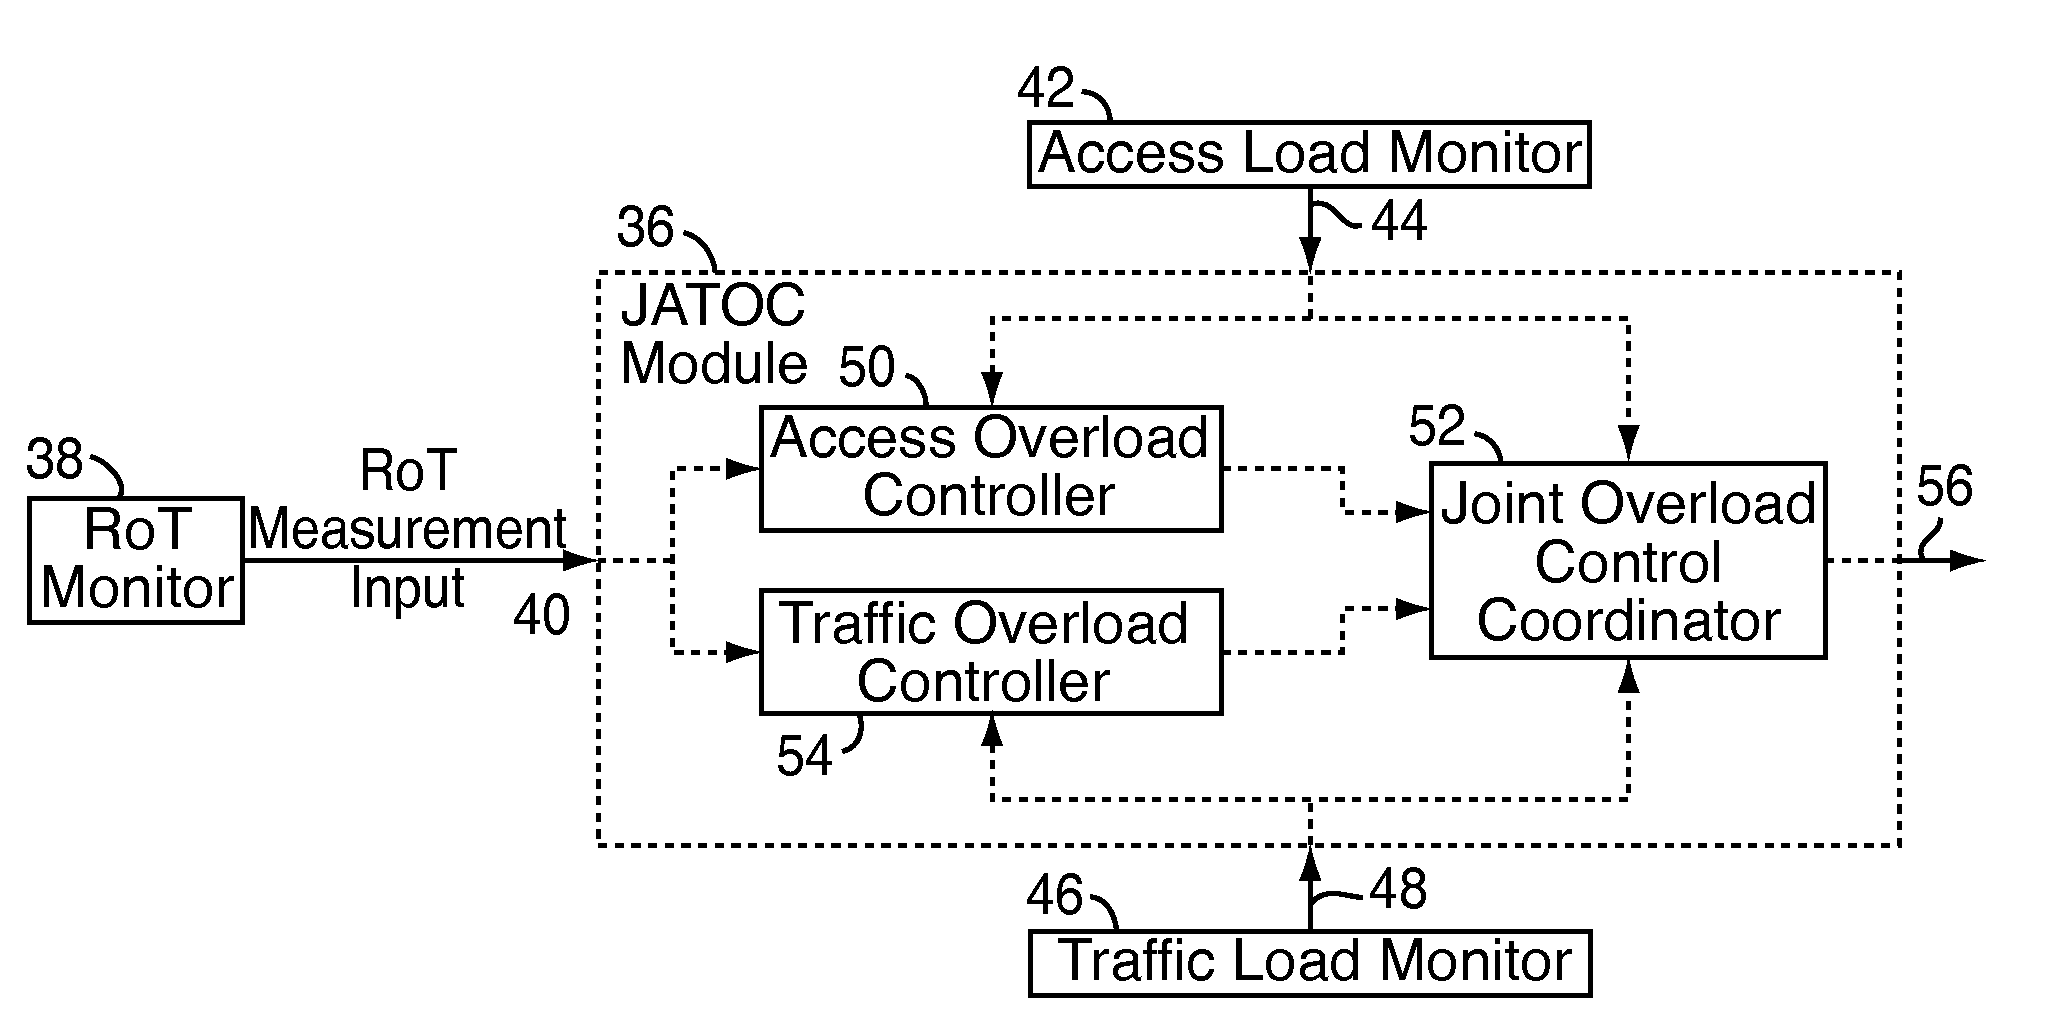 Method and system for joint reverse link access and traffic channel radio frequency overload control